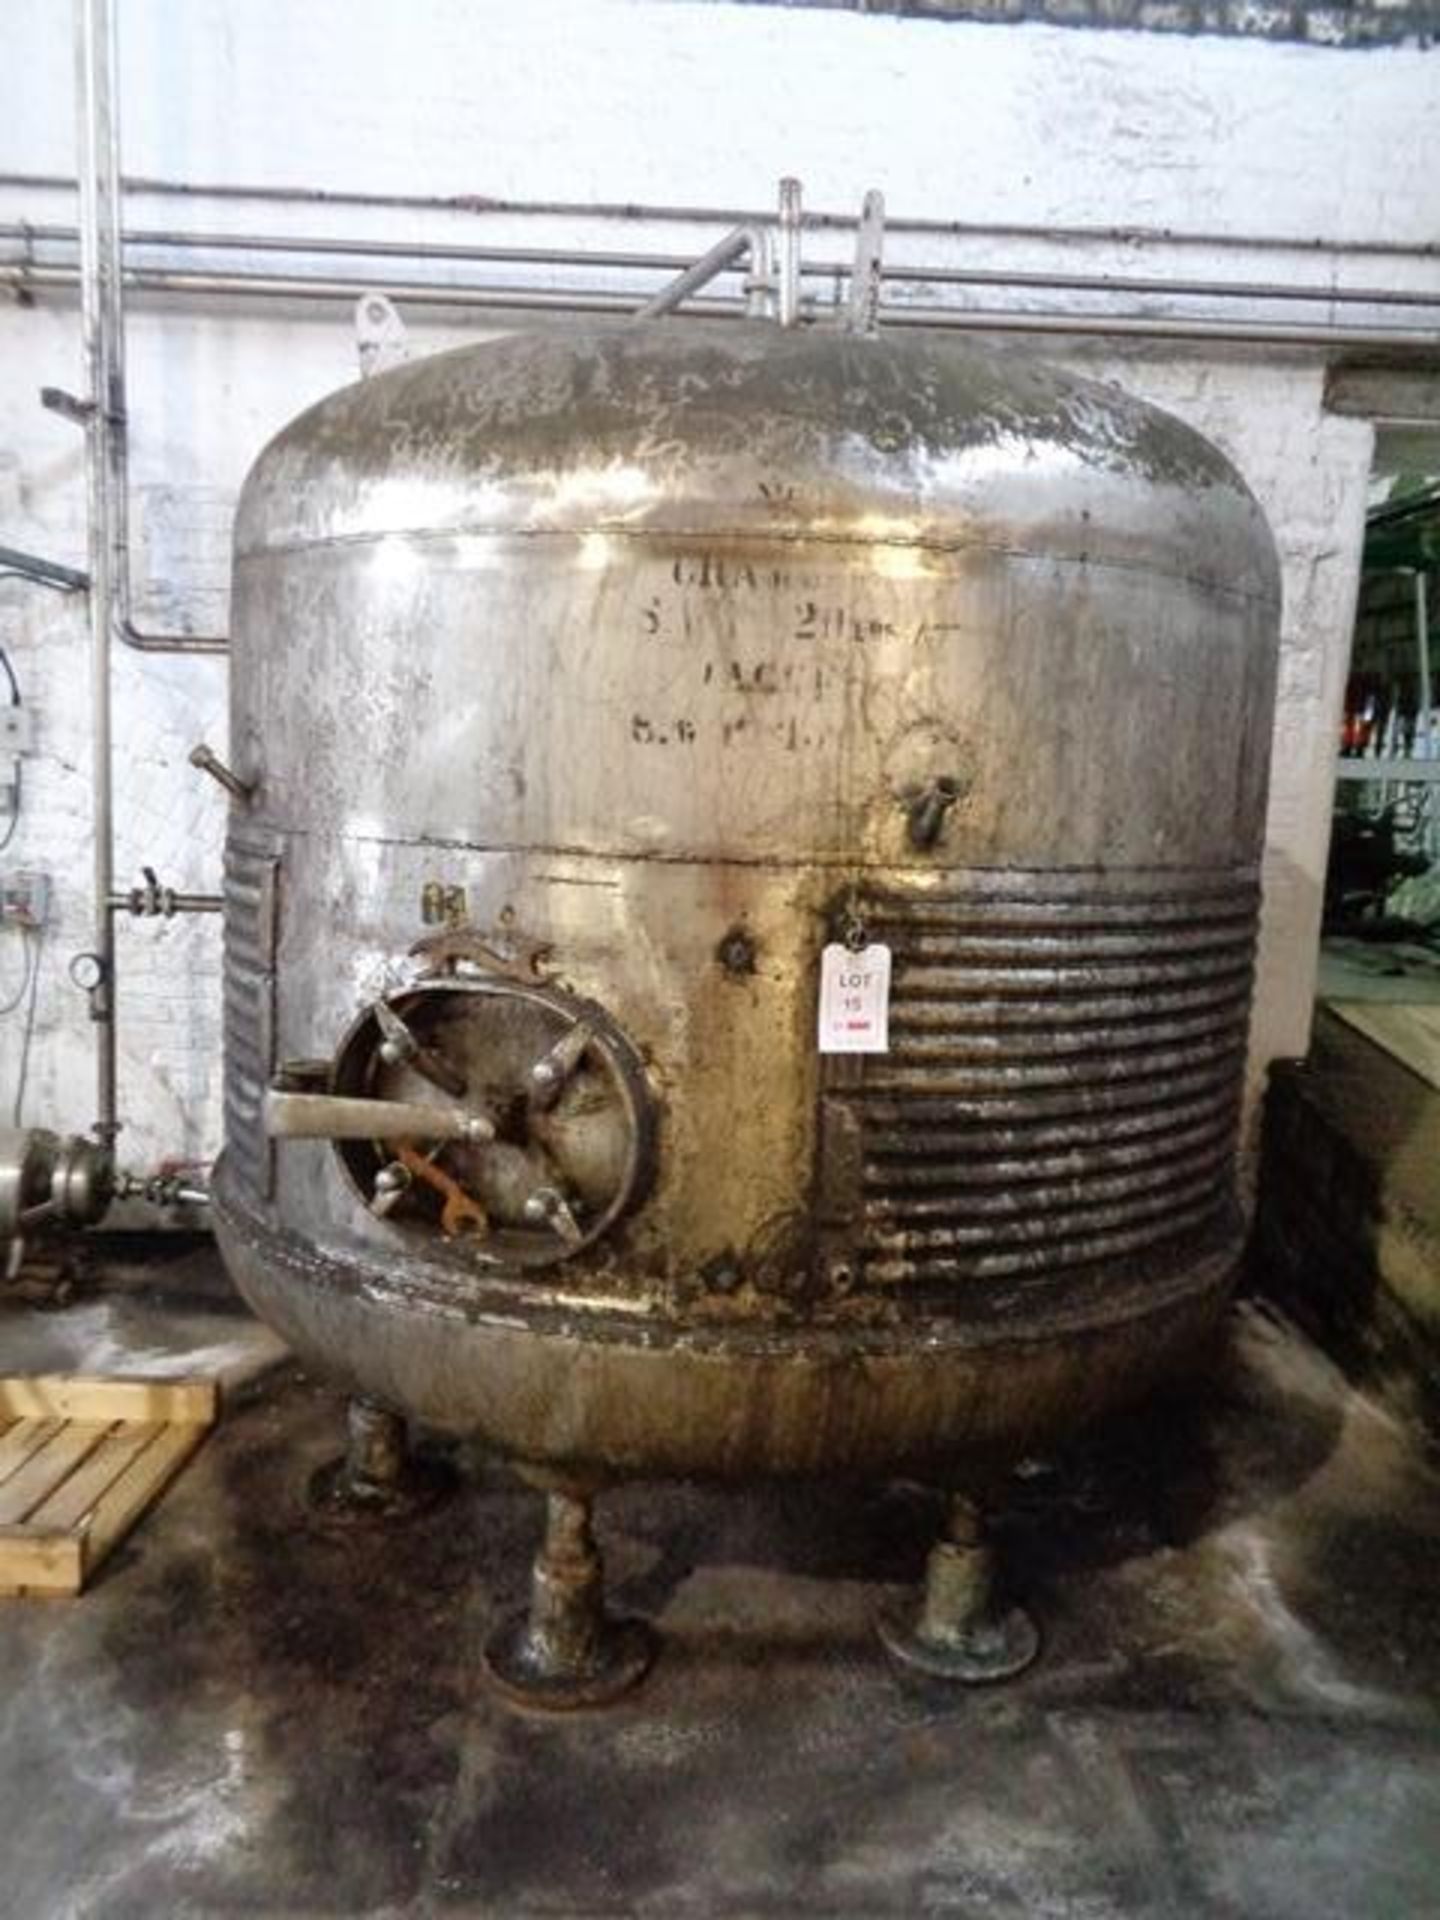 Stainless steel framed single skin water holding tank, approx 3000mm dia x 2000mm height (approx